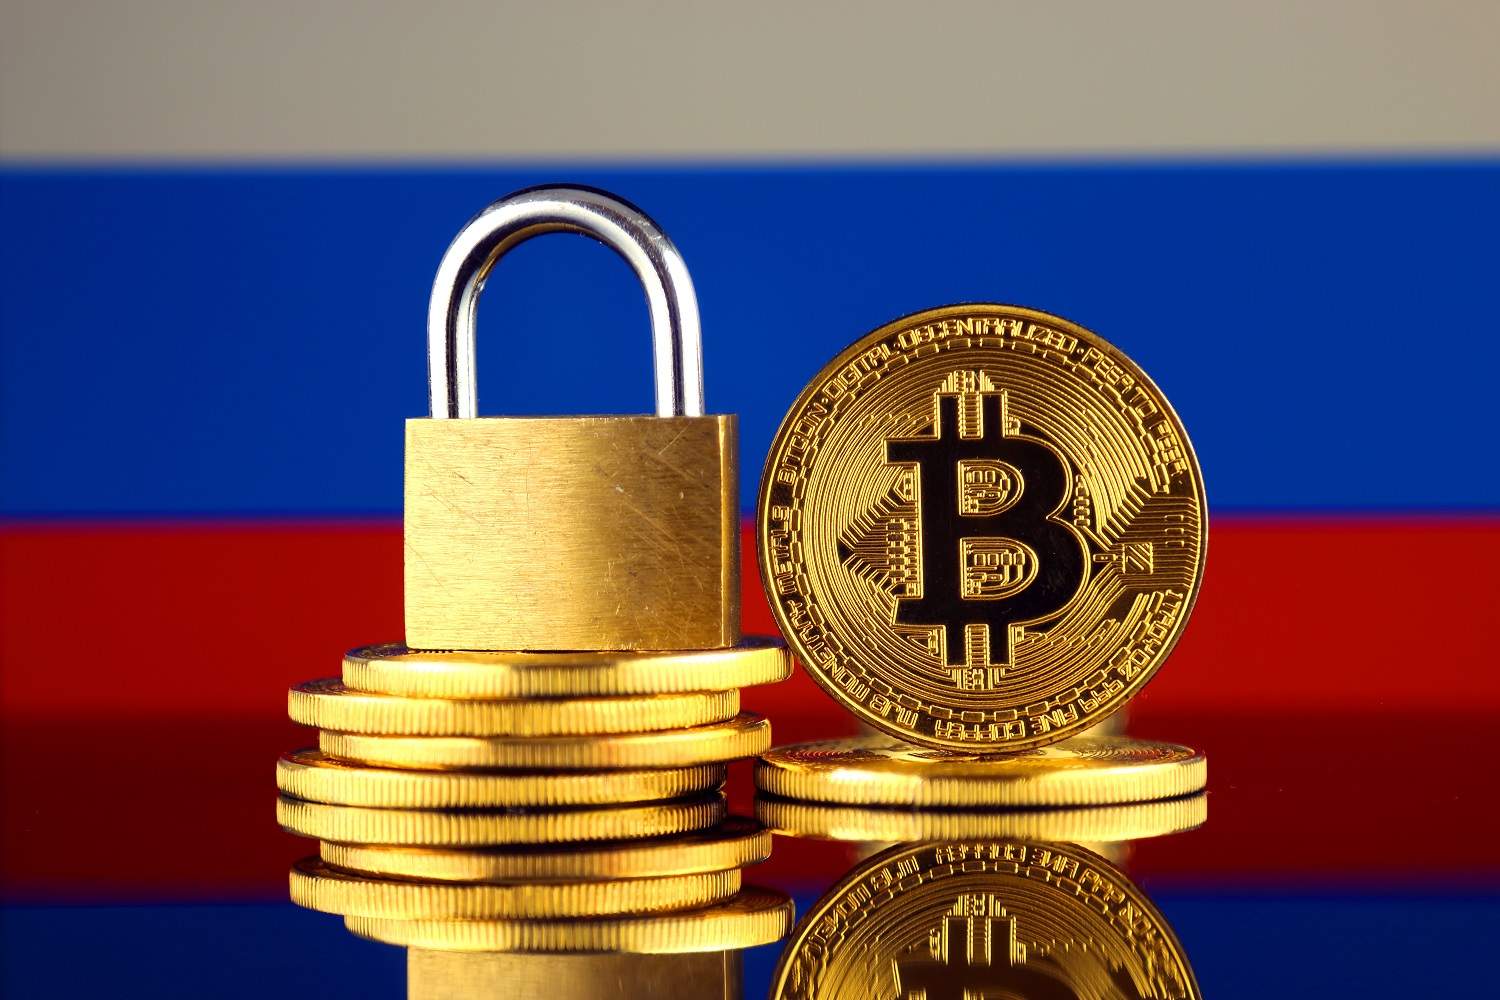 Piles of coins representing Bitcoin and a padlock against the backdrop of the Russian flag.